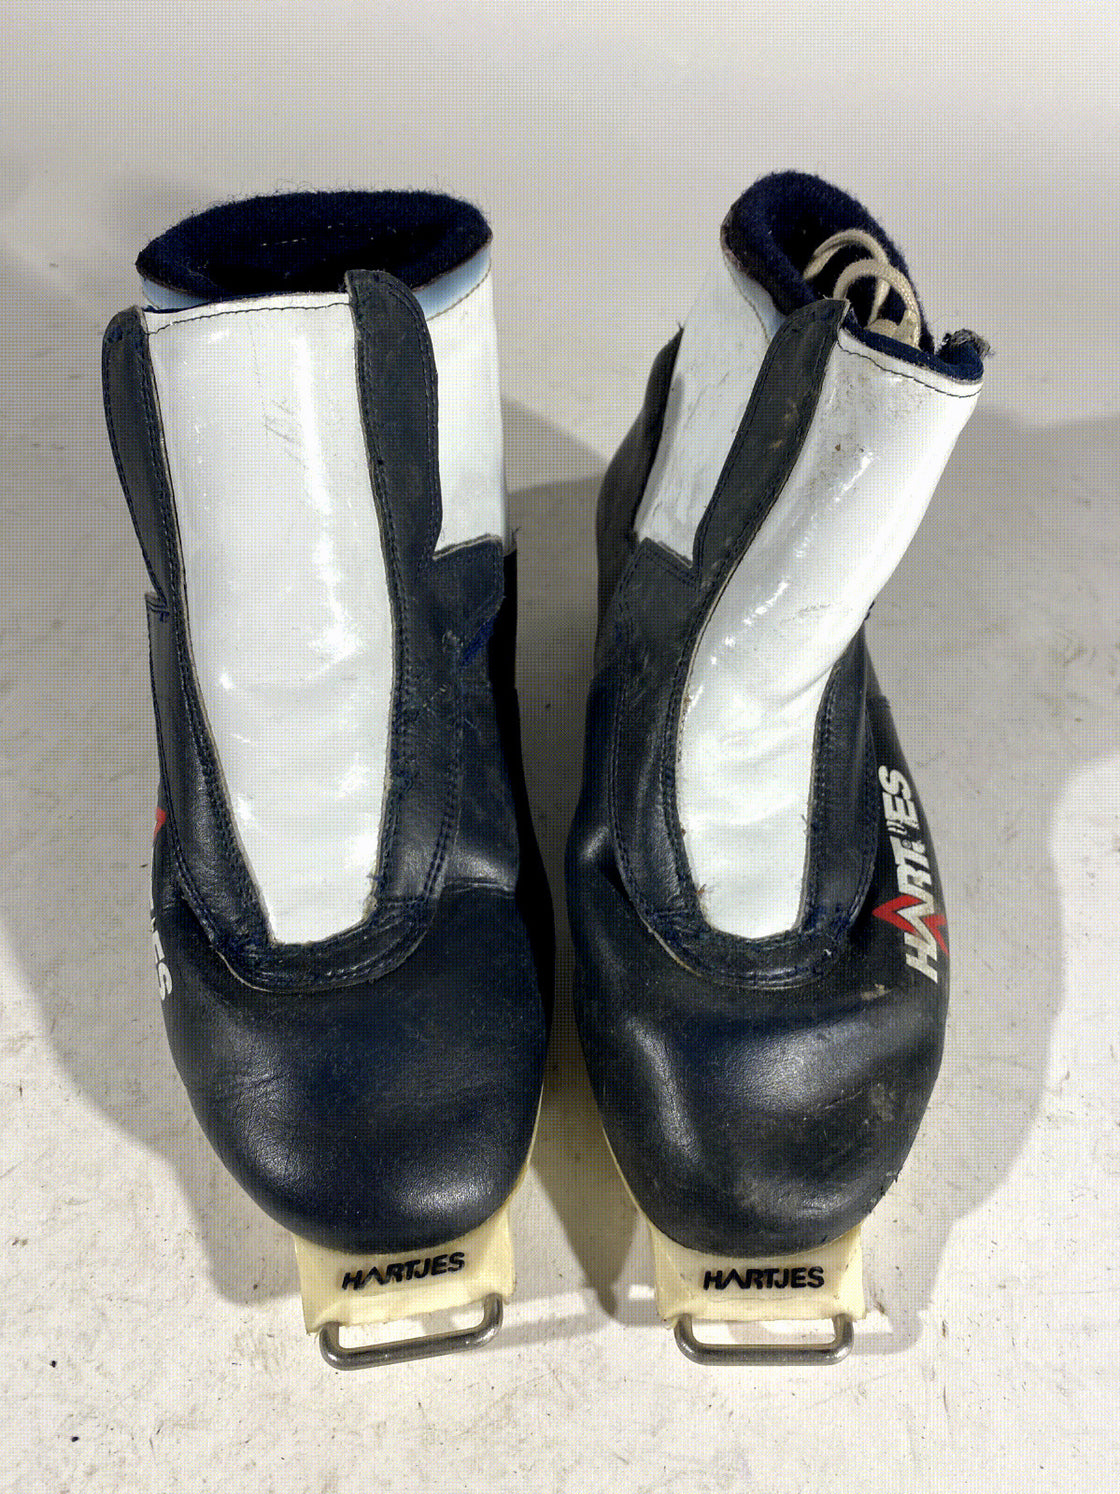 Hartjes Vintage Nordic Cross Country Ski Boots Size EU39 US7 SNS Old Bindings